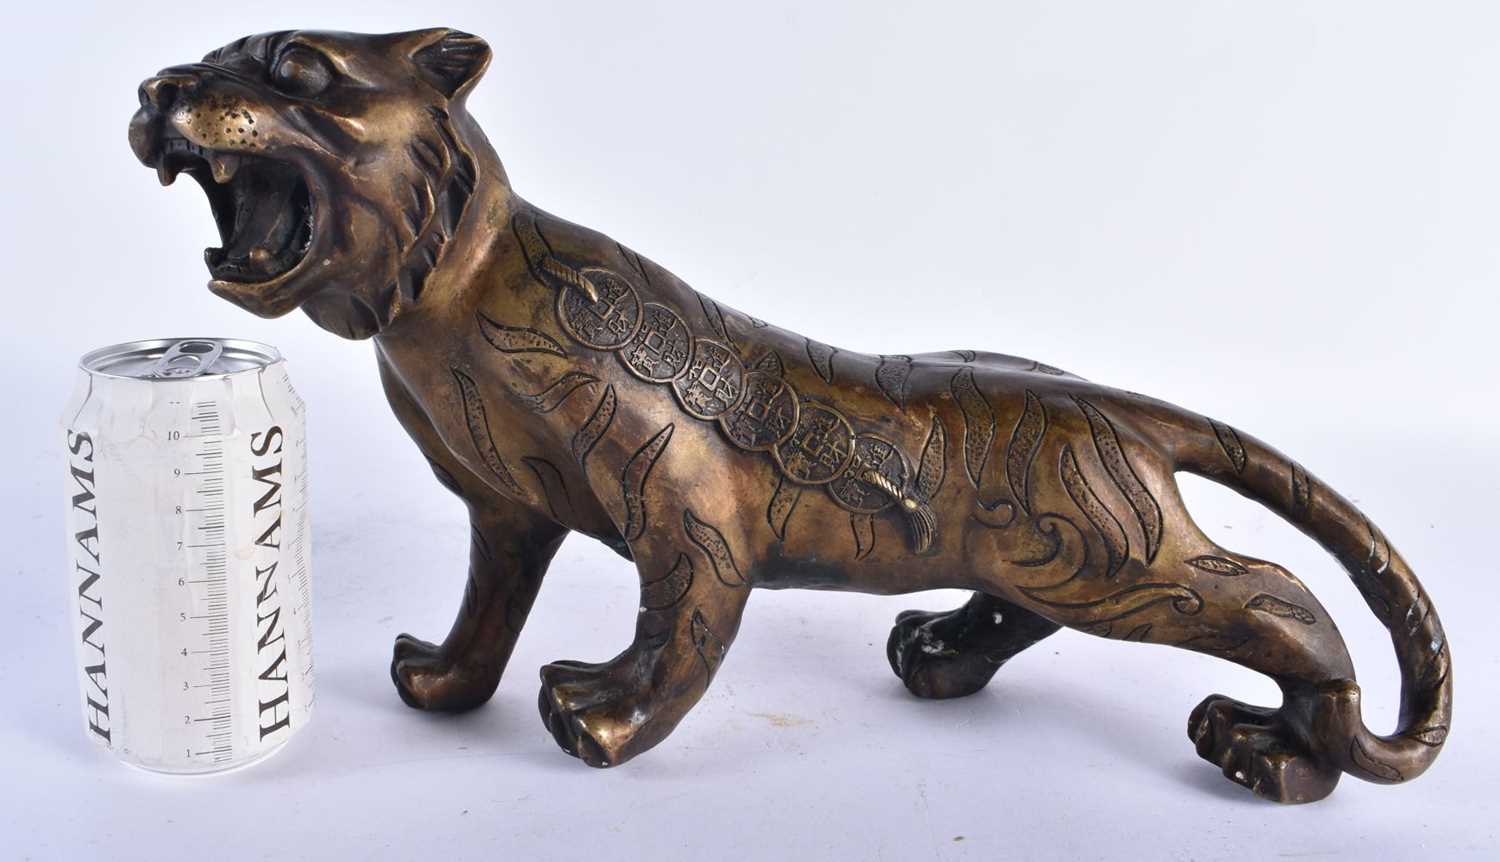 A LARGE CHINESE BRONZE FIGURE OF A LUCKY MONEY TIGER 20th Century. 38 cm x 20 cm.